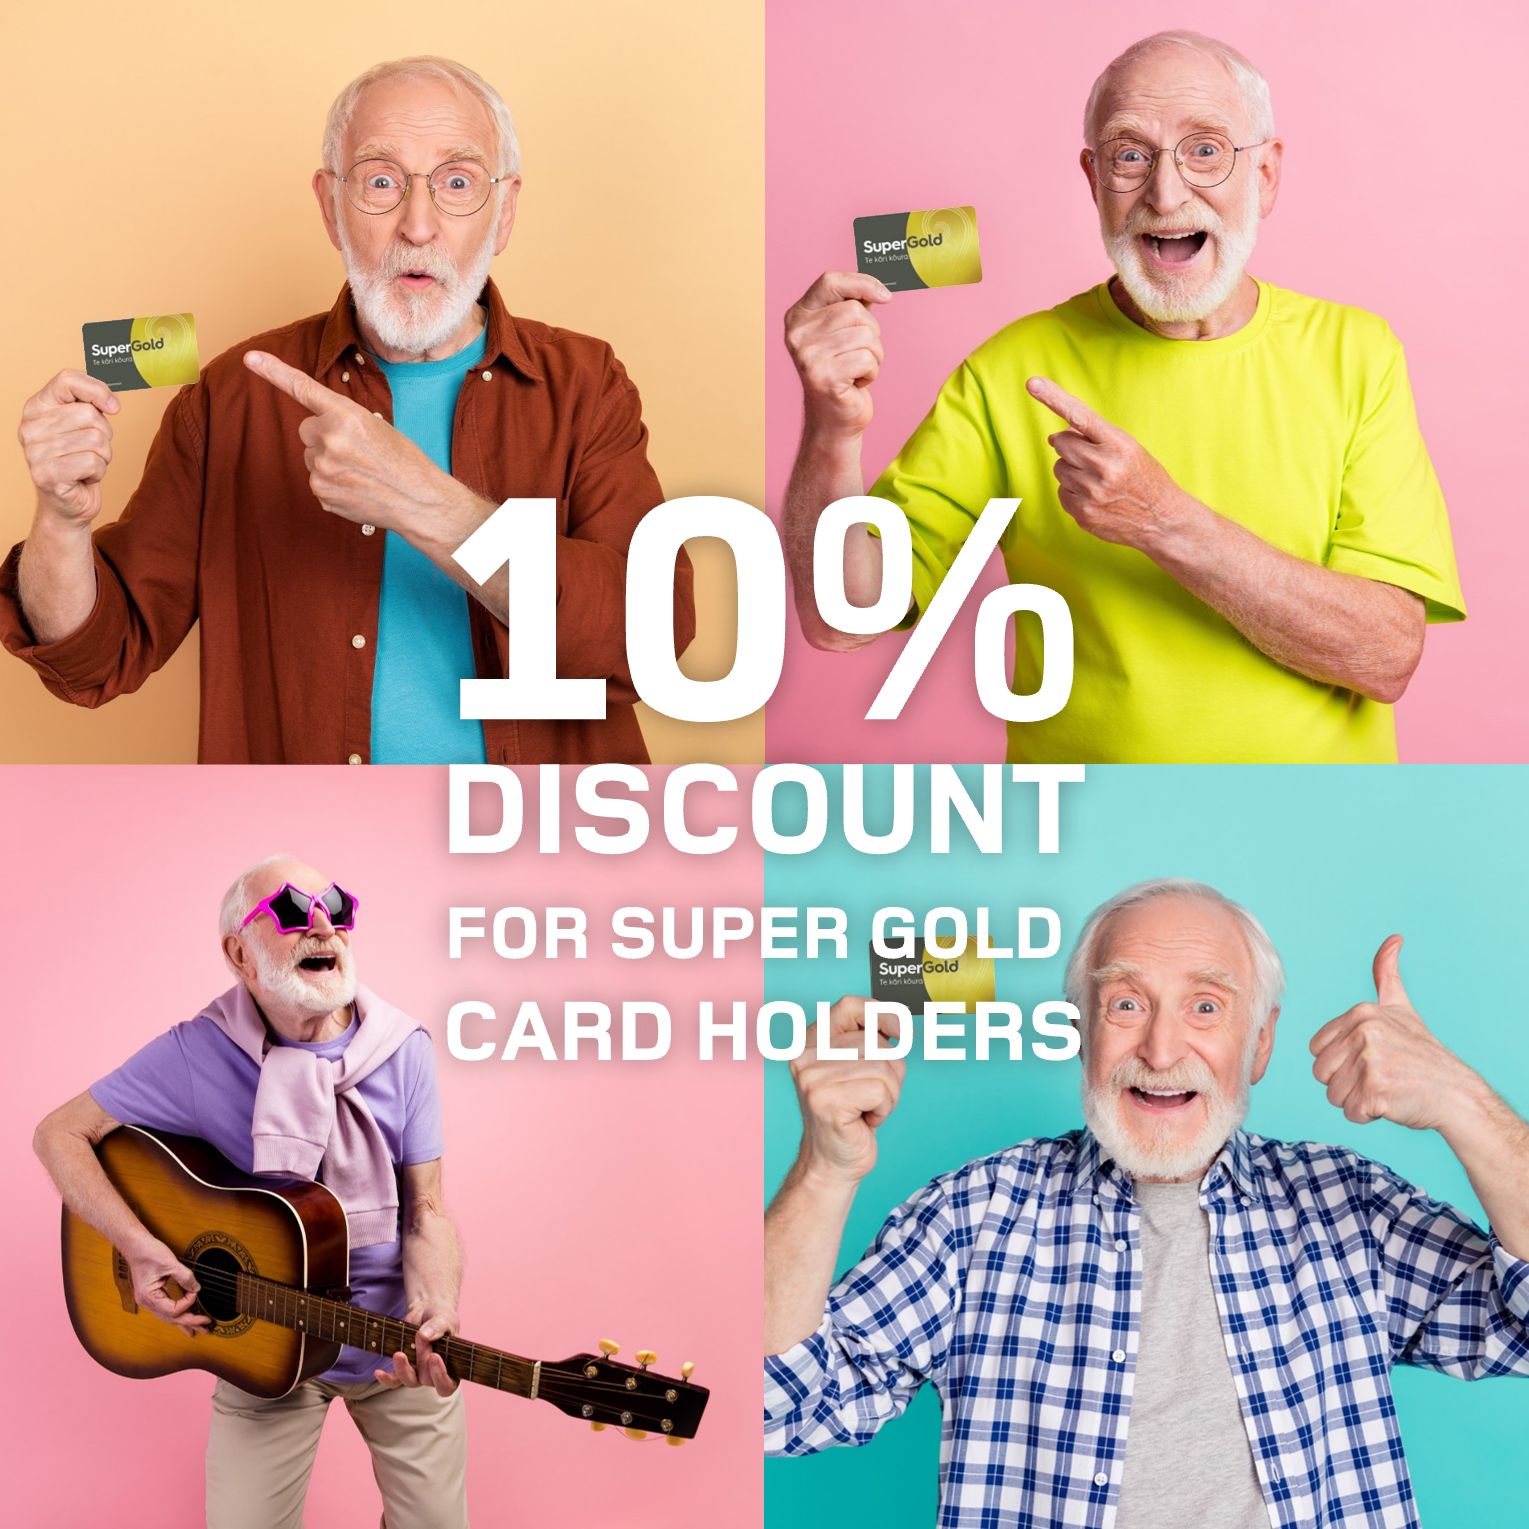 A man celebrating 10% discount for super gold card holders